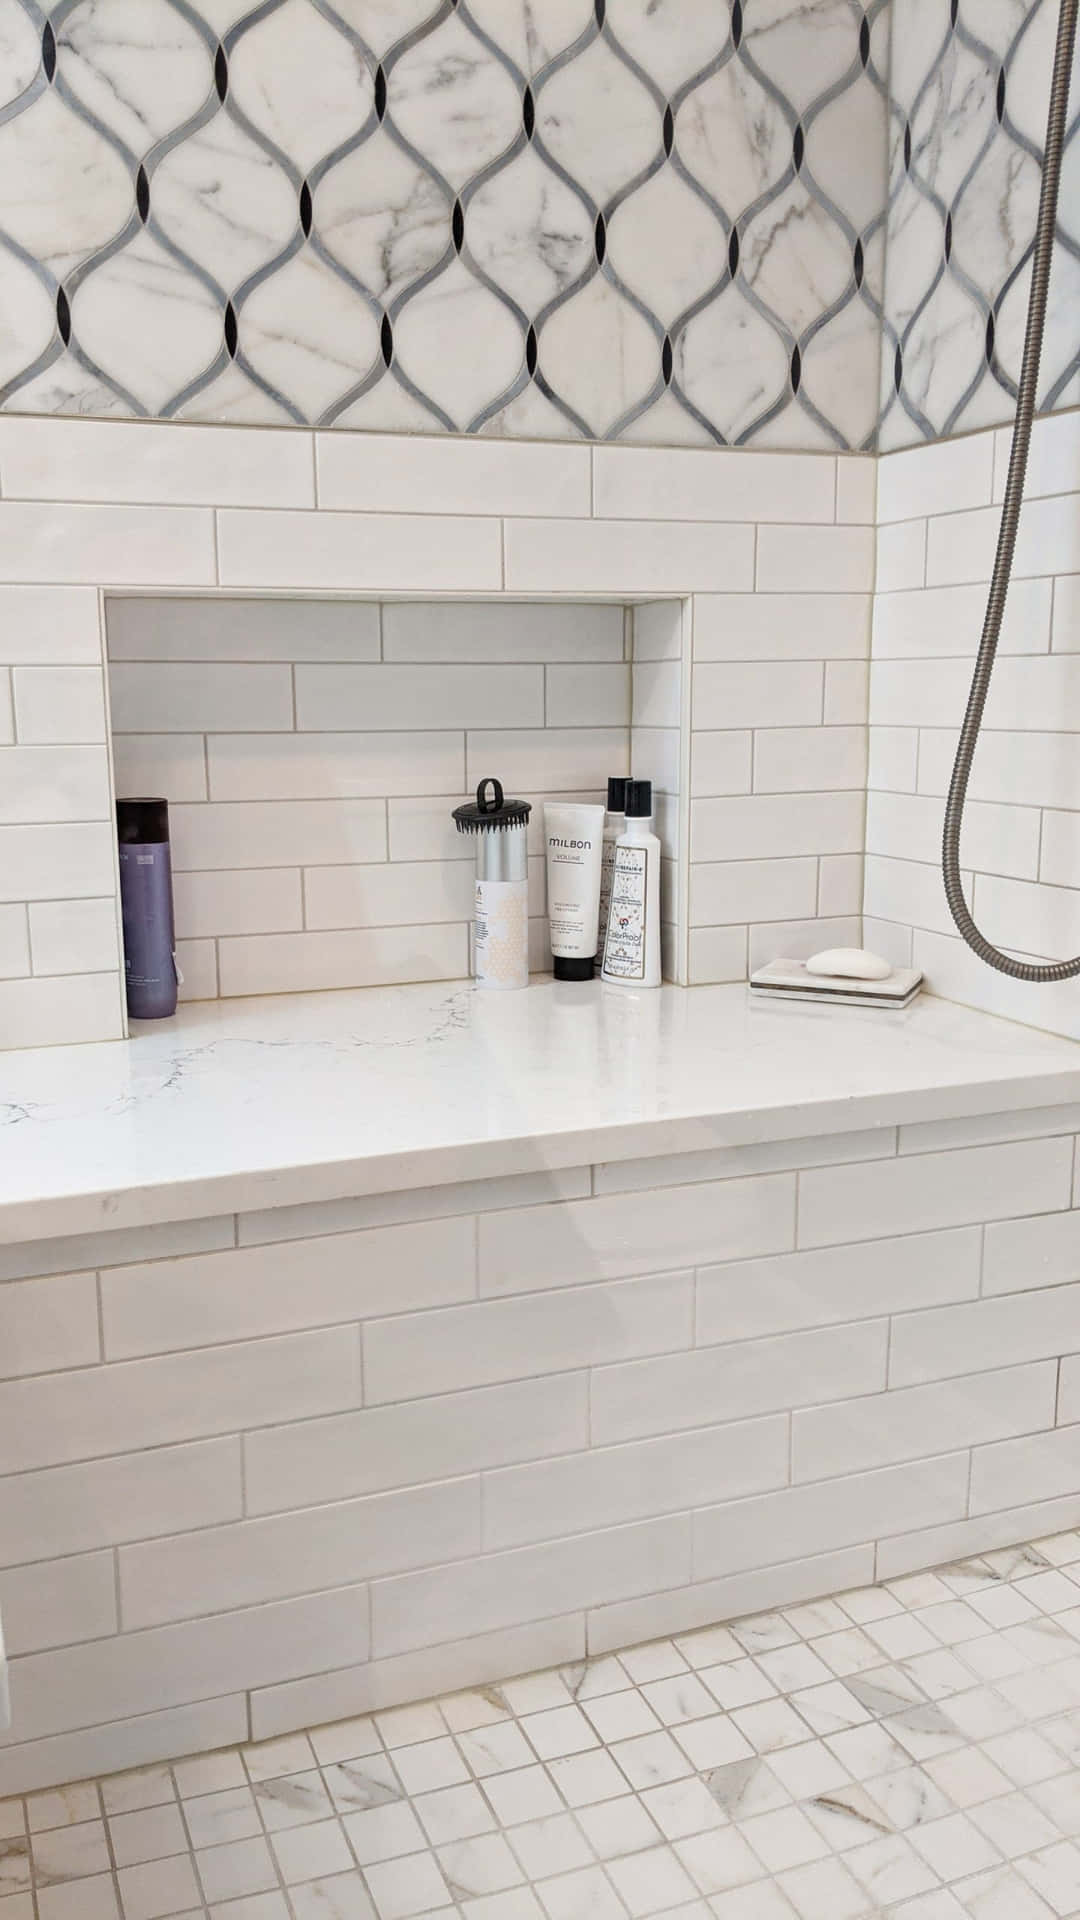 Stylish and chic, one tile can make all the difference.